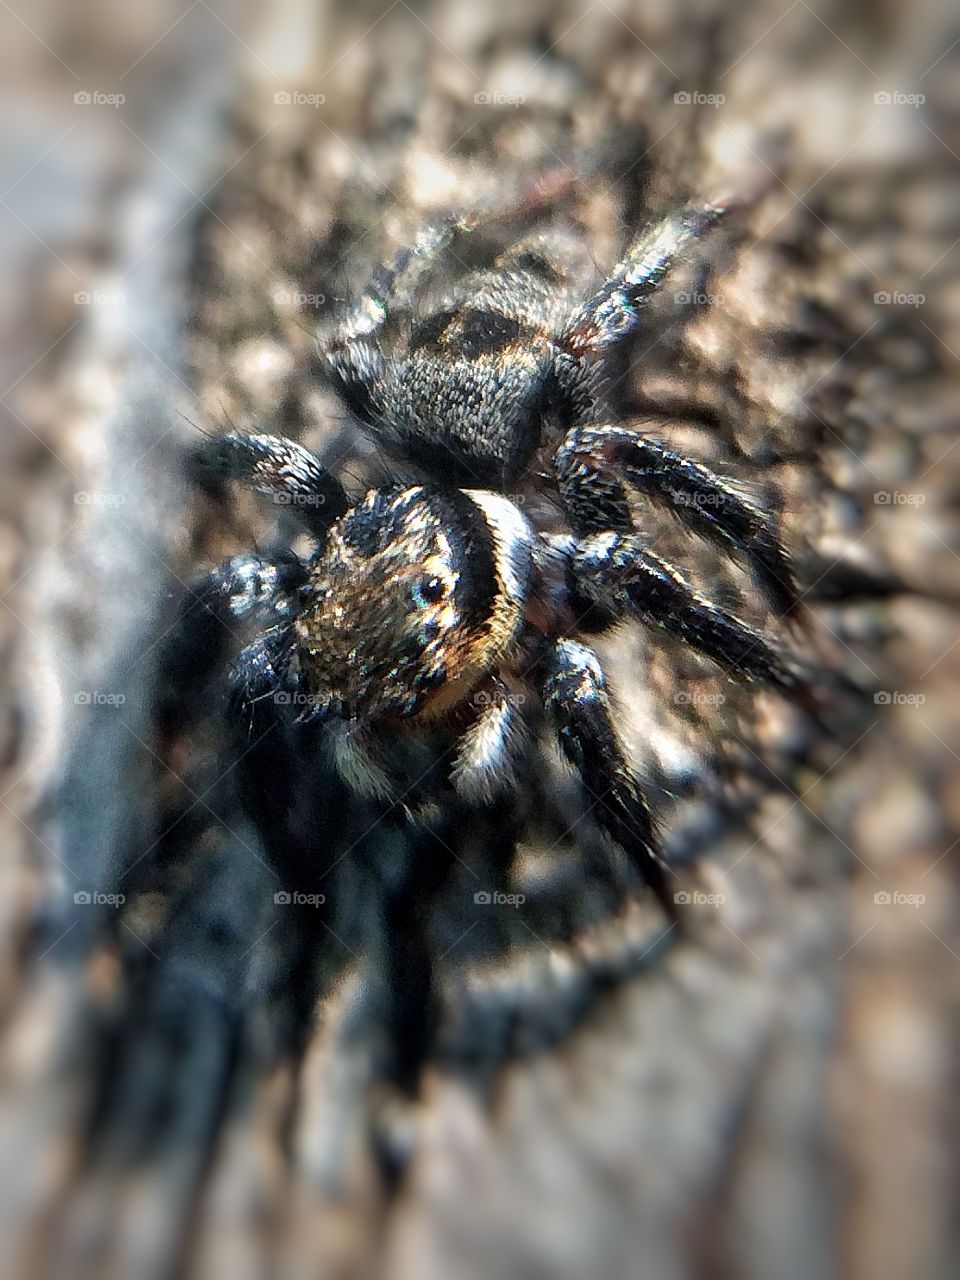 Little spider | Photo with iPhone 5S + Macro lens.